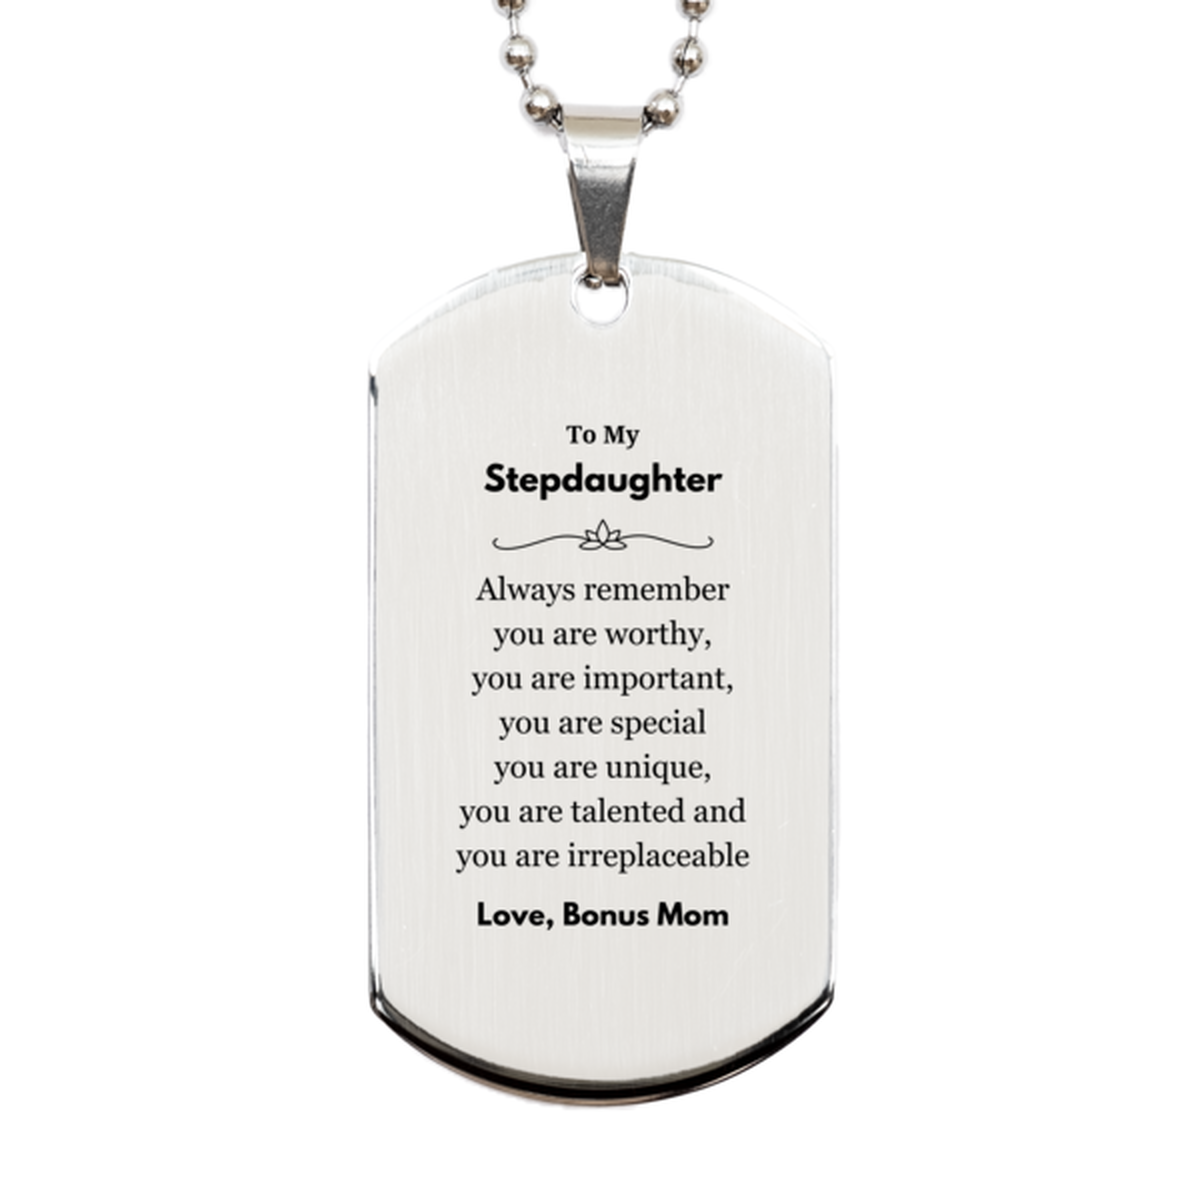 Stepdaughter Birthday Gifts from Bonus Mom, Inspirational Silver Dog Tag for Stepdaughter Christmas Graduation Gifts for Stepdaughter Always remember you are worthy, you are important. Love, Bonus Mom